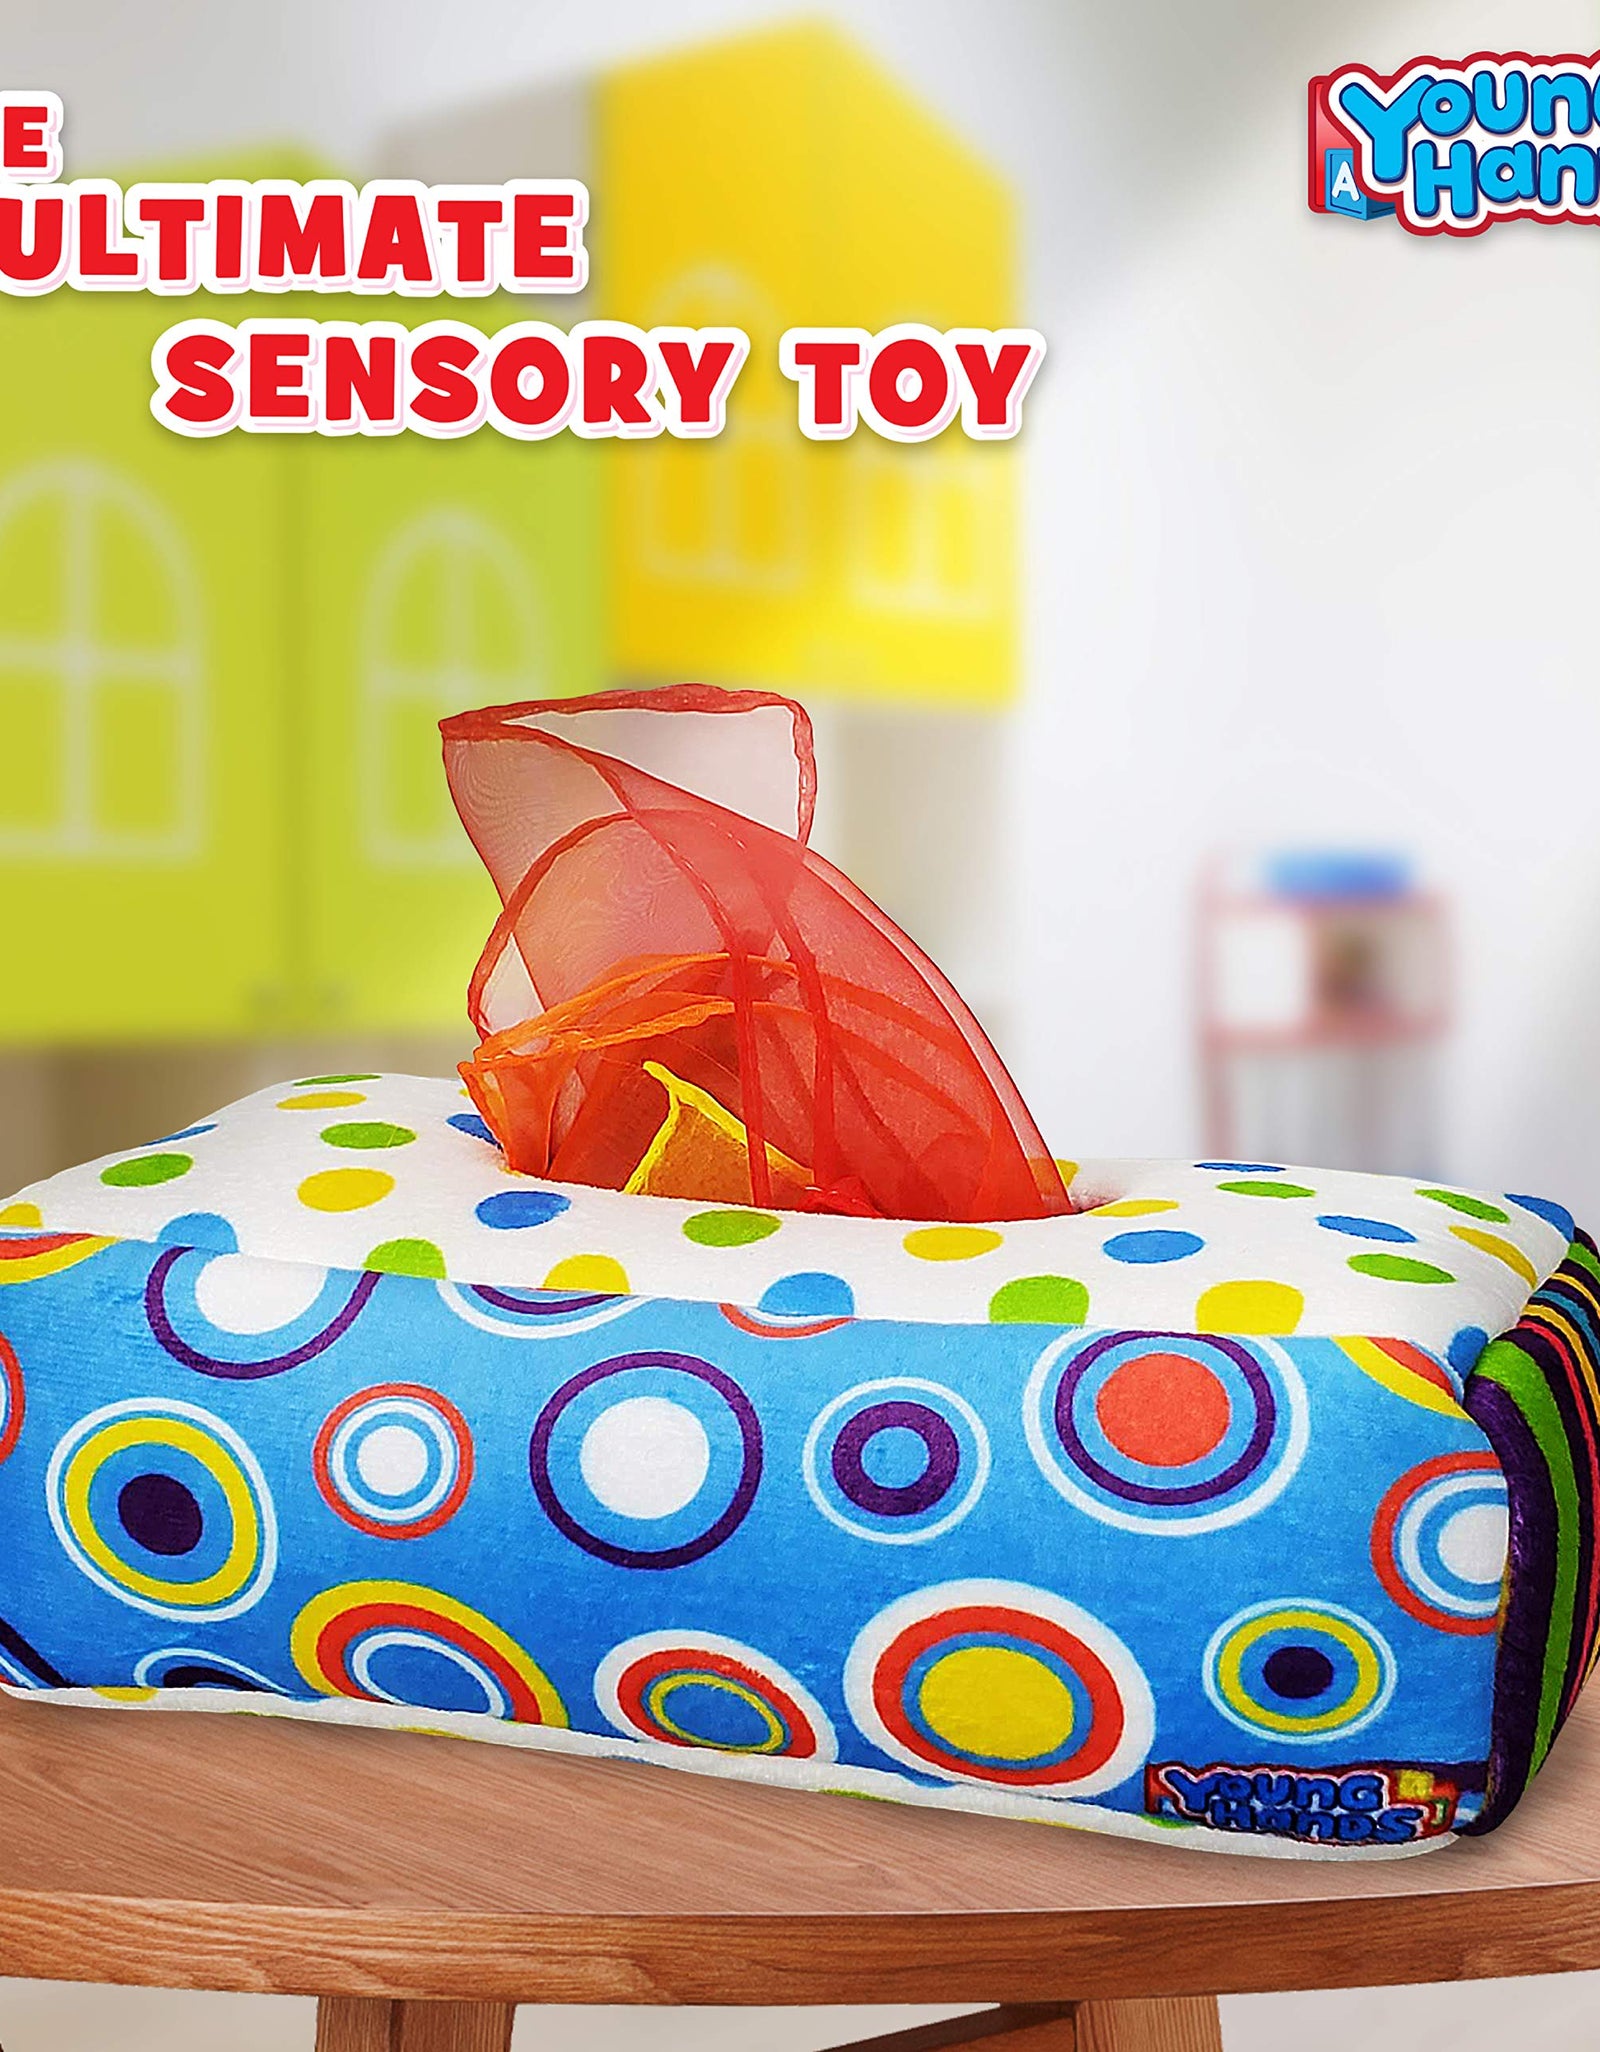 Sensory Pull Along Toddler Infant Baby Tissue Box - Colorful Juggling Rainbow Dance Scarves for Kids STEM Montessori Educational Manipulative Preschool Learning Toys – 5 Month 1-2-Year-Old Activities